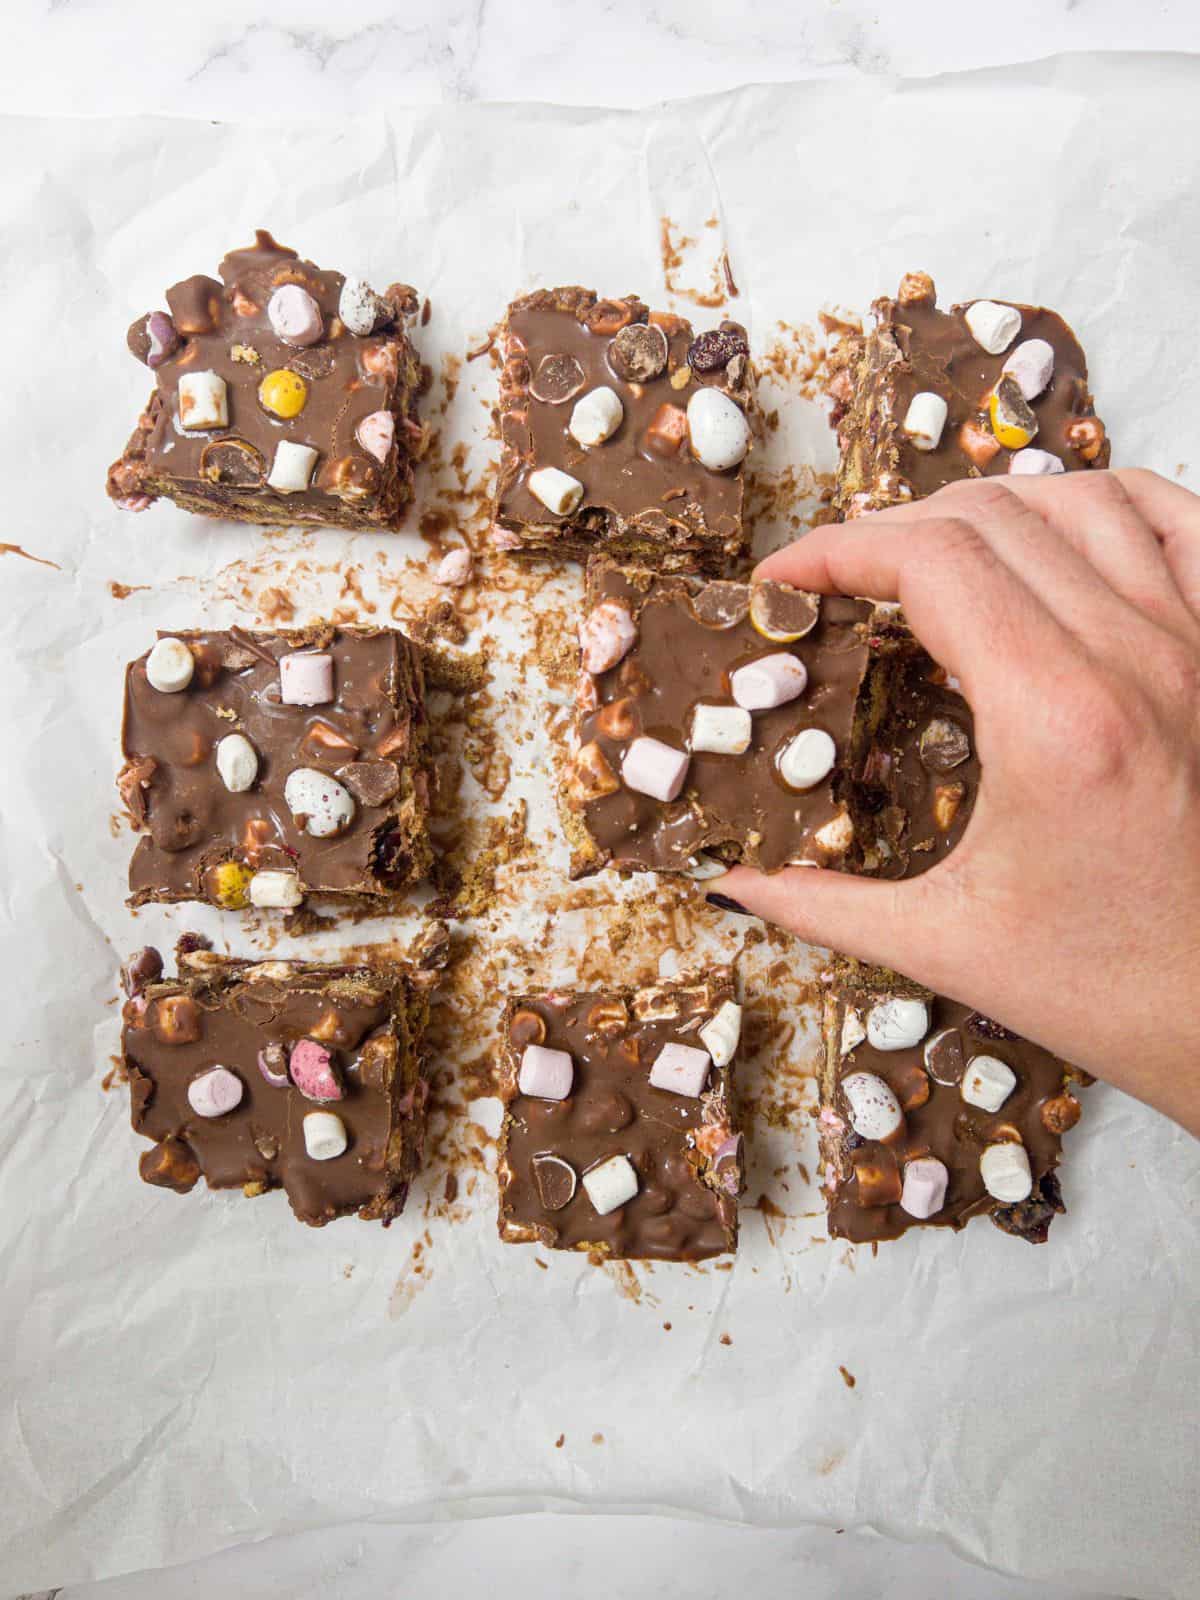 Nine cut squares of rocky roads sitting on greaseproof paper, with one slice being picked up by hand.